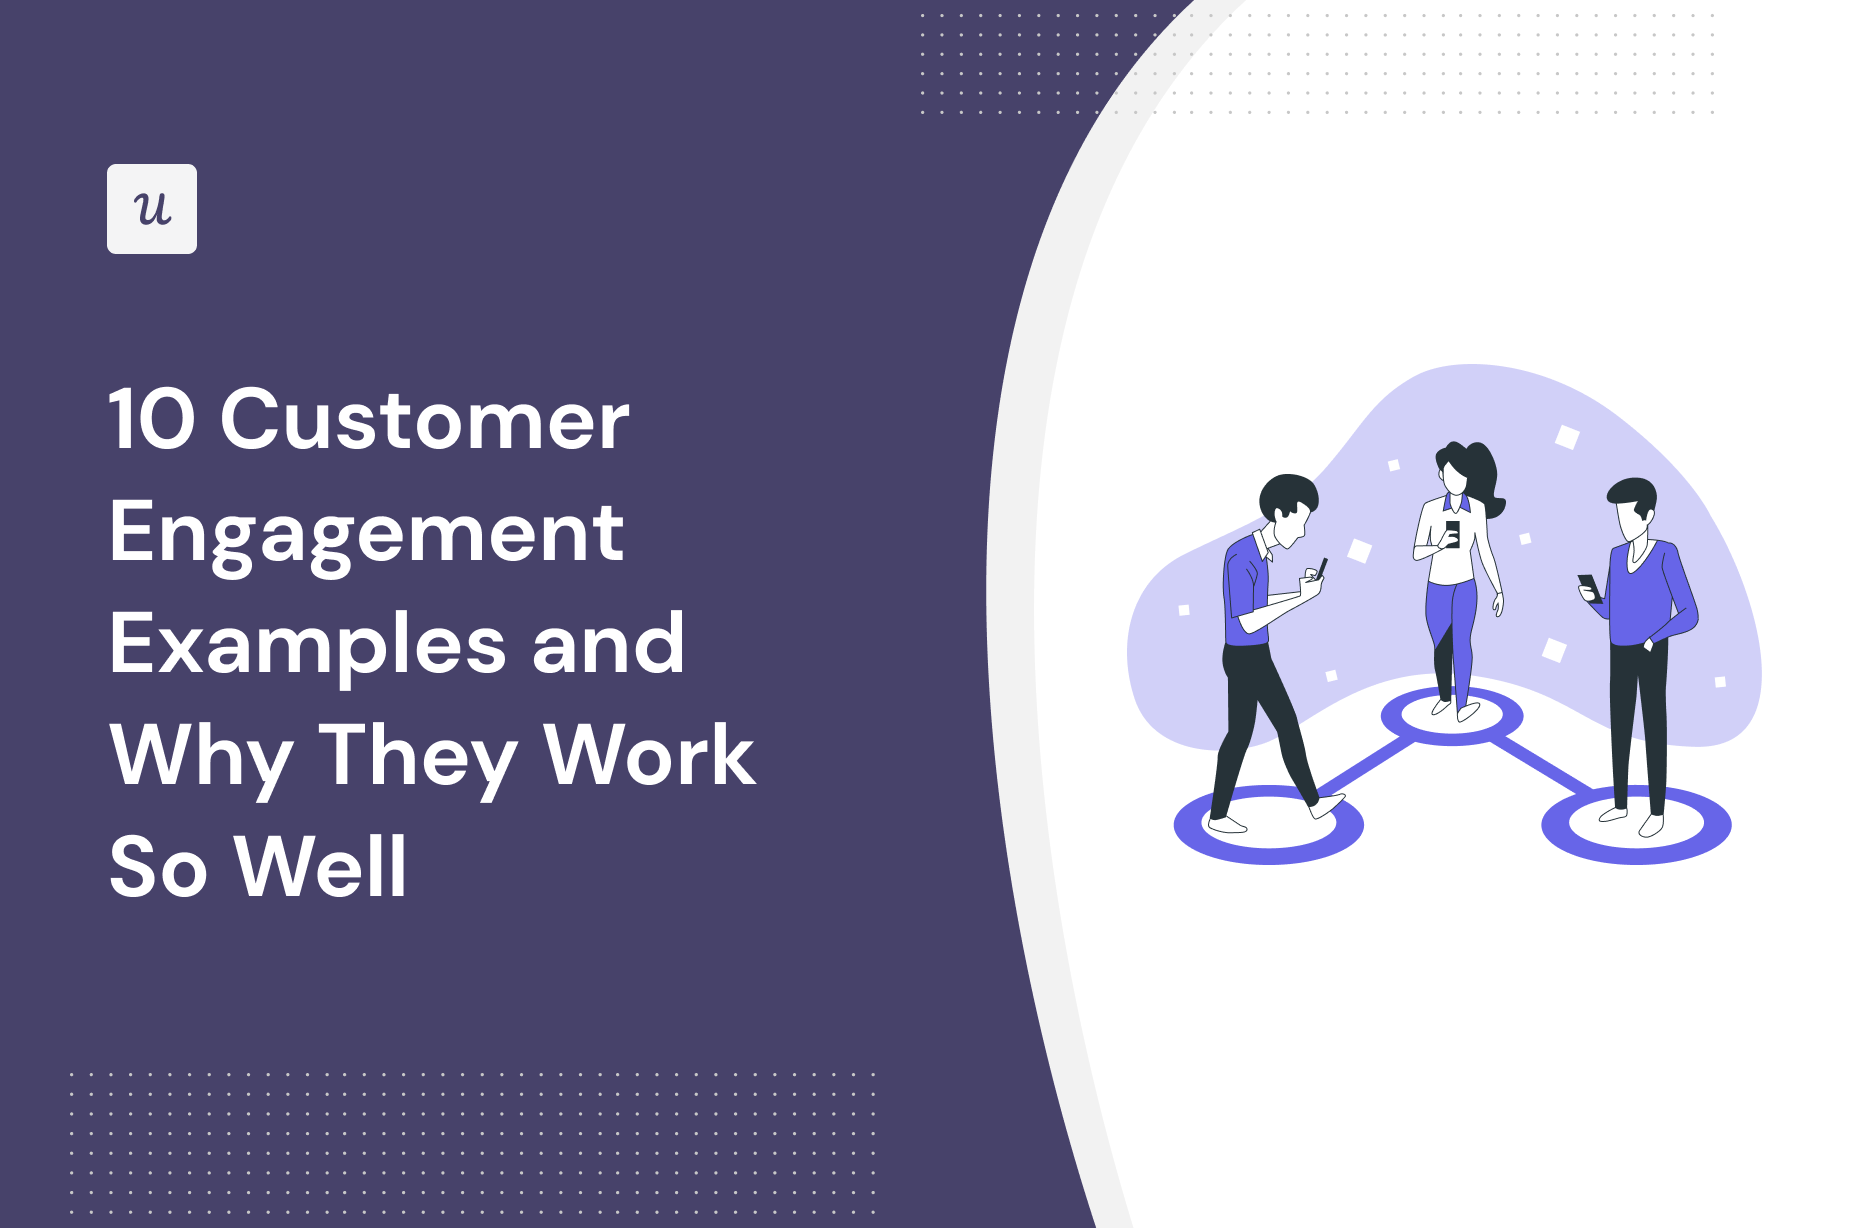 10 Customer Engagement Examples and Why They Work So Well